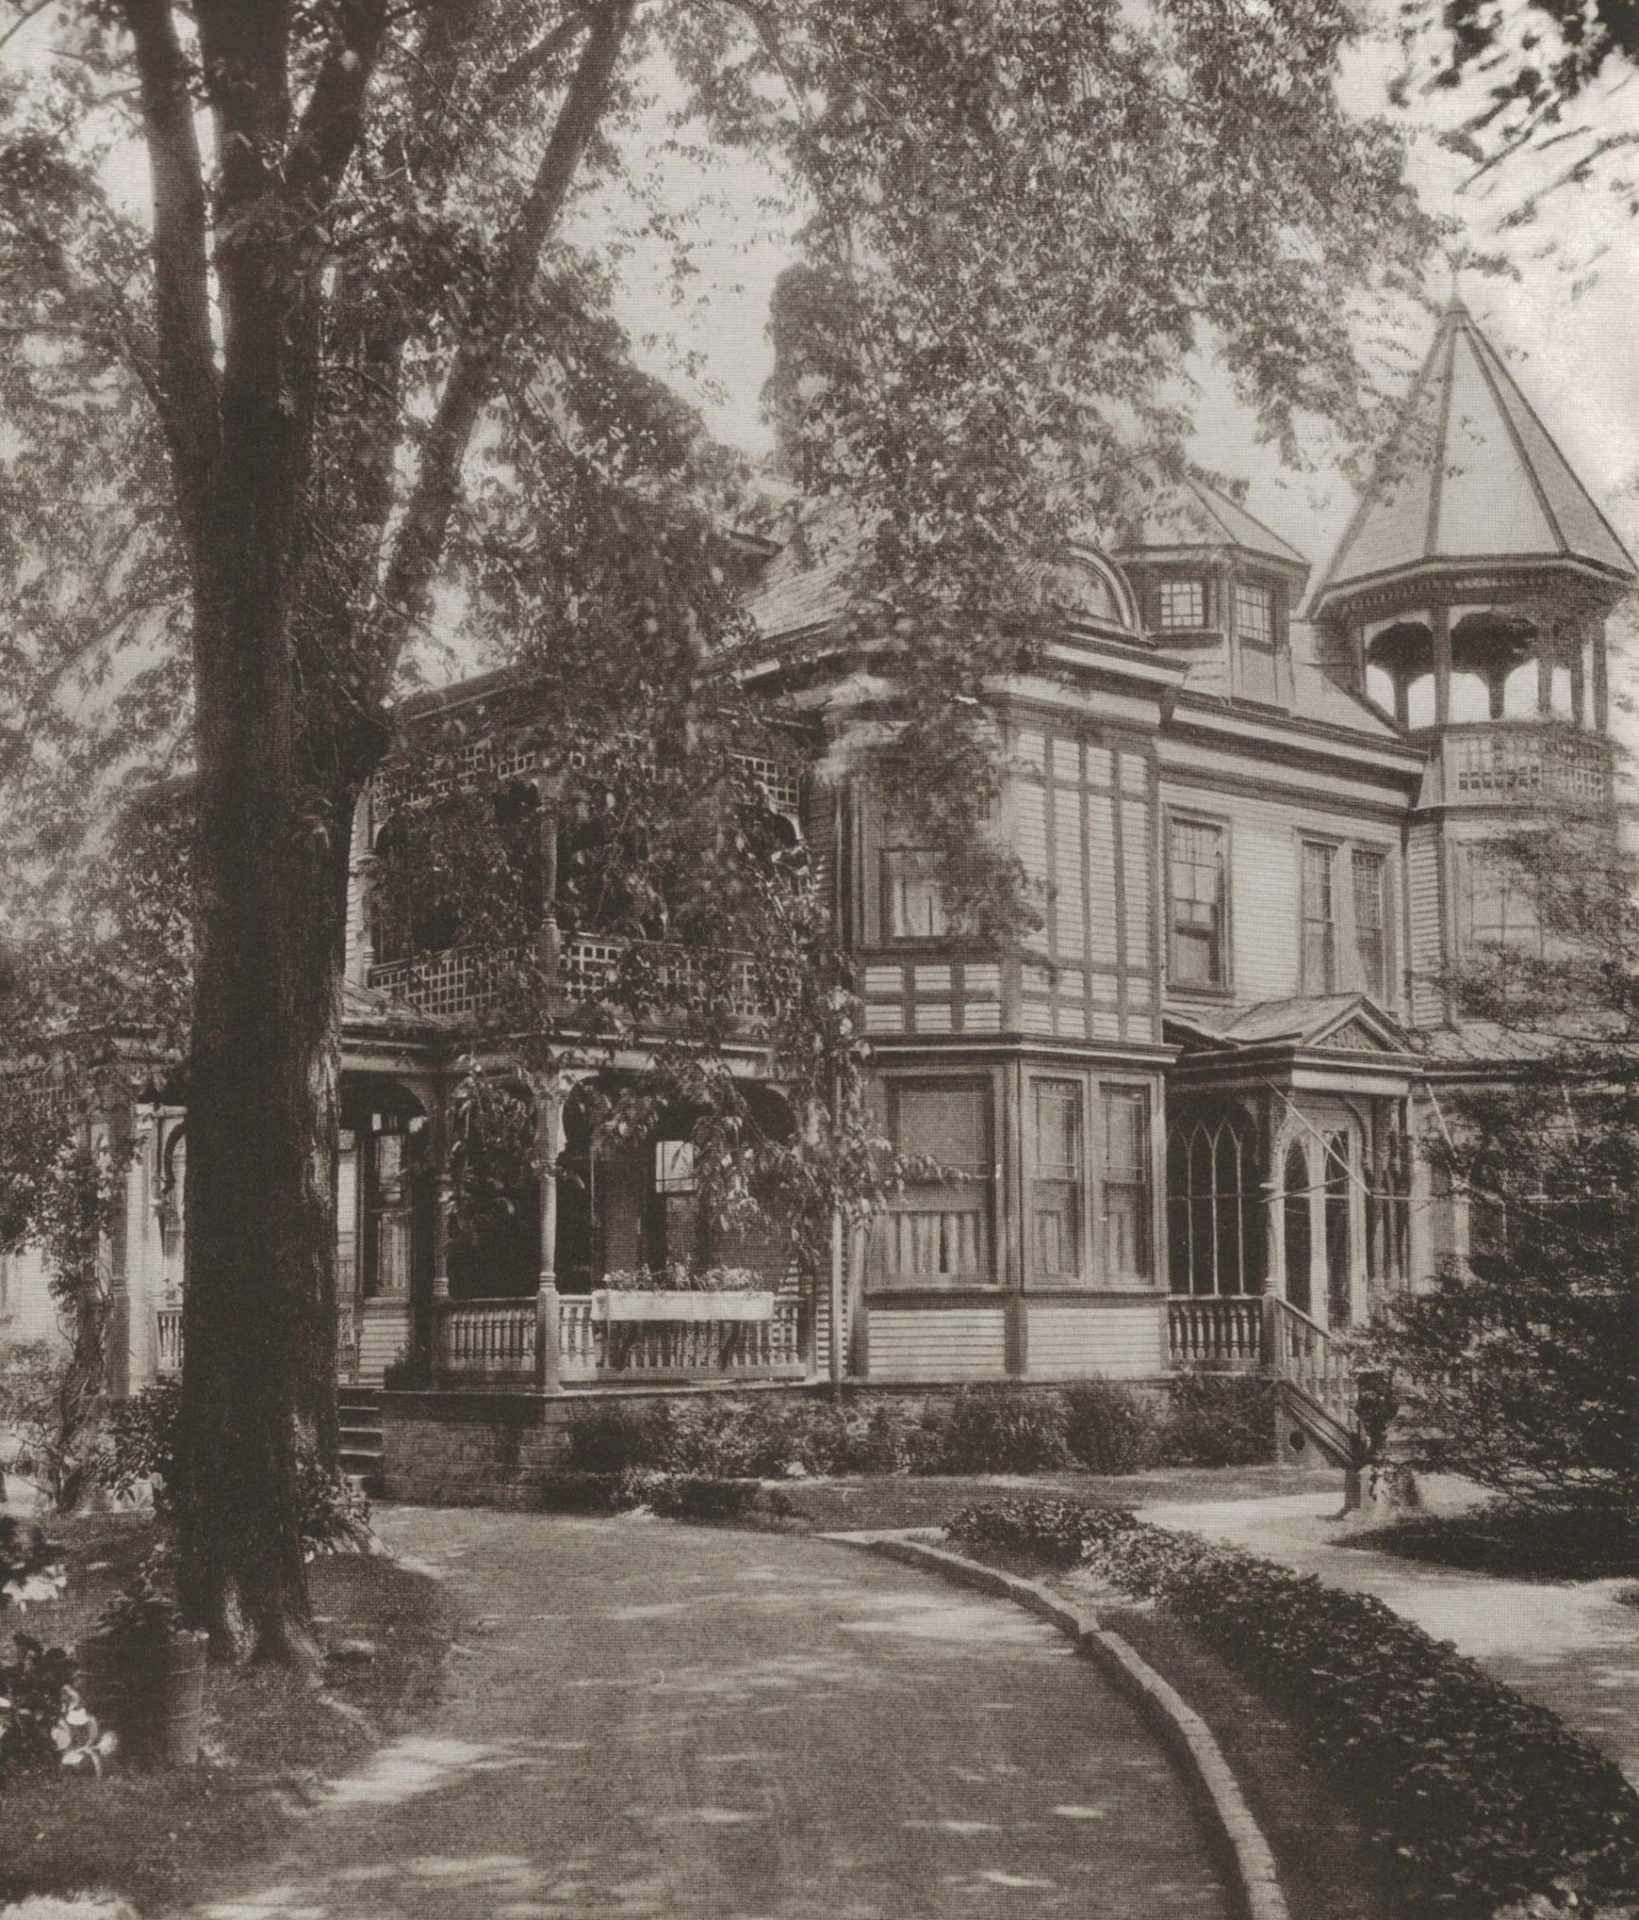 black and white photo of an old victorian home with a porch and cone roof sitting on a lawn with a large tree